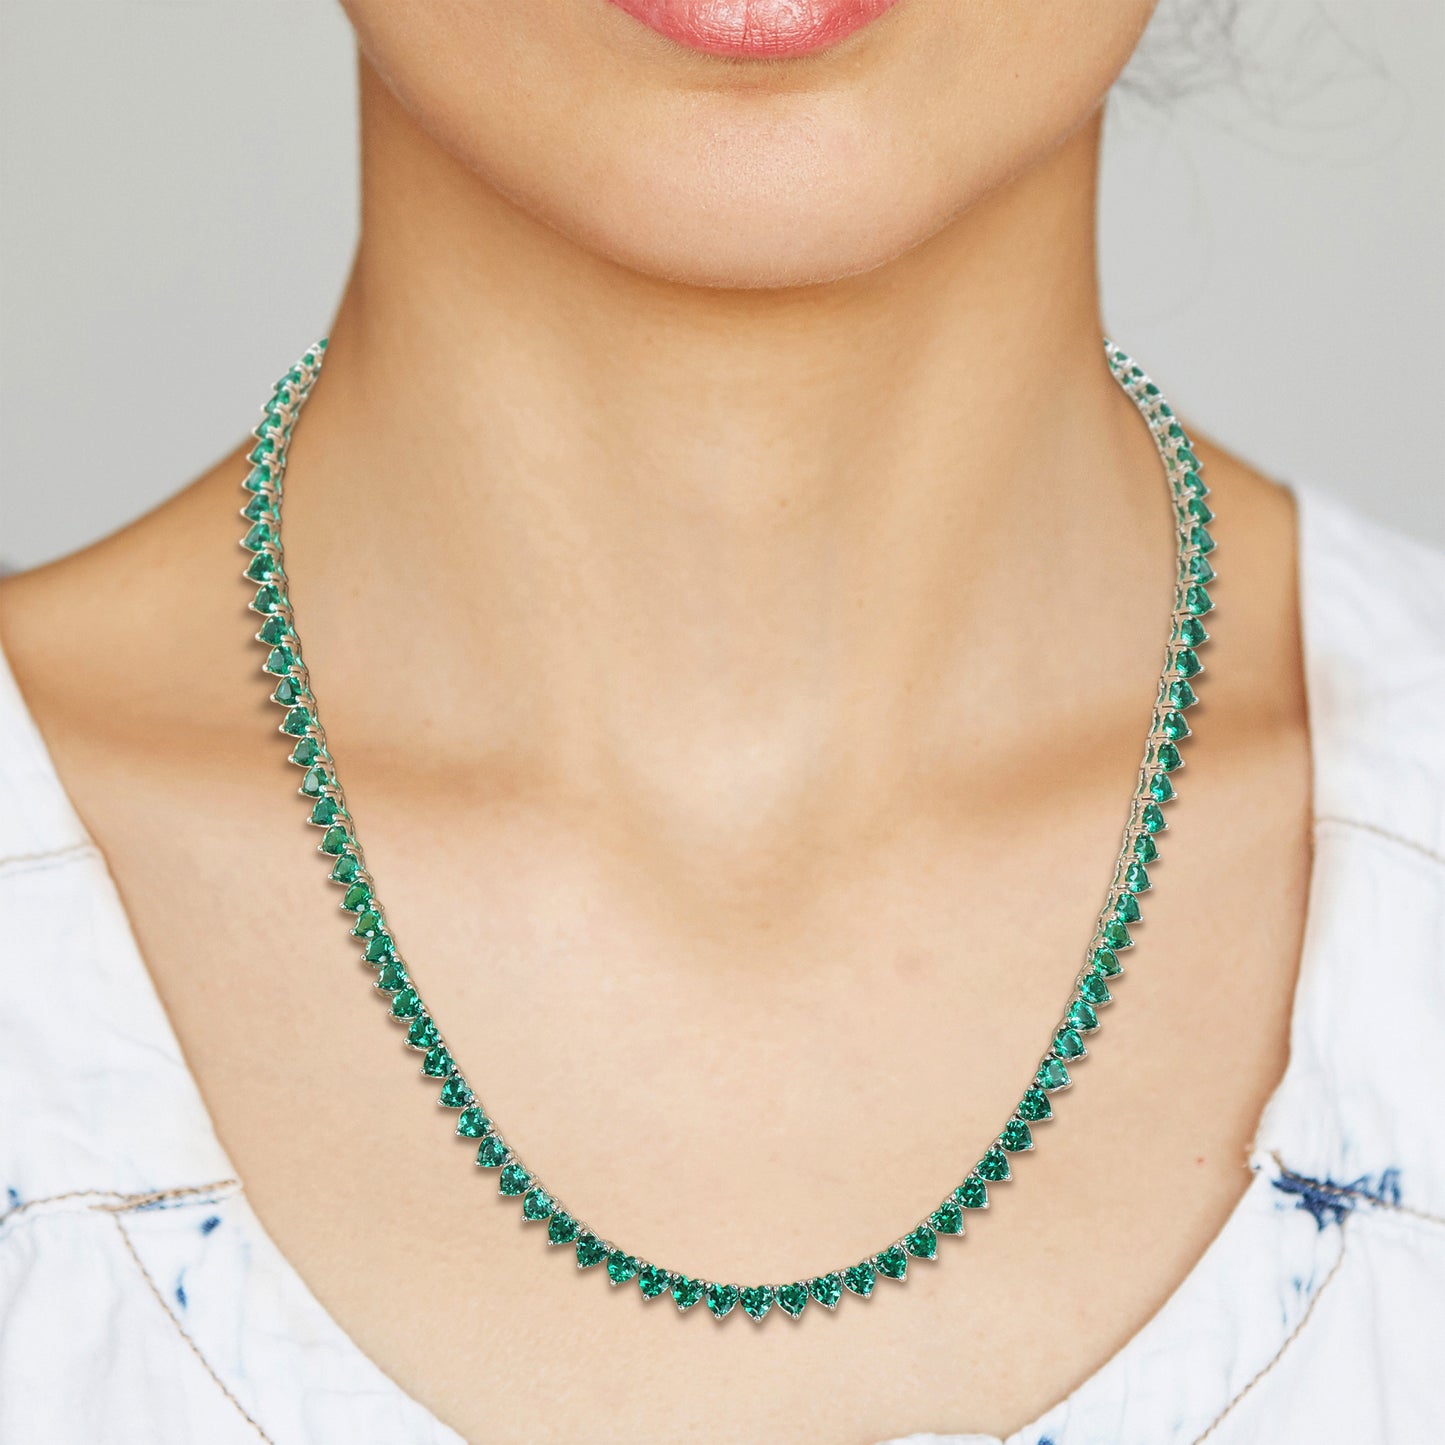 24 ct TGW Created emerald necklace silver white w/ tongue and groove clasp length (inches): 18